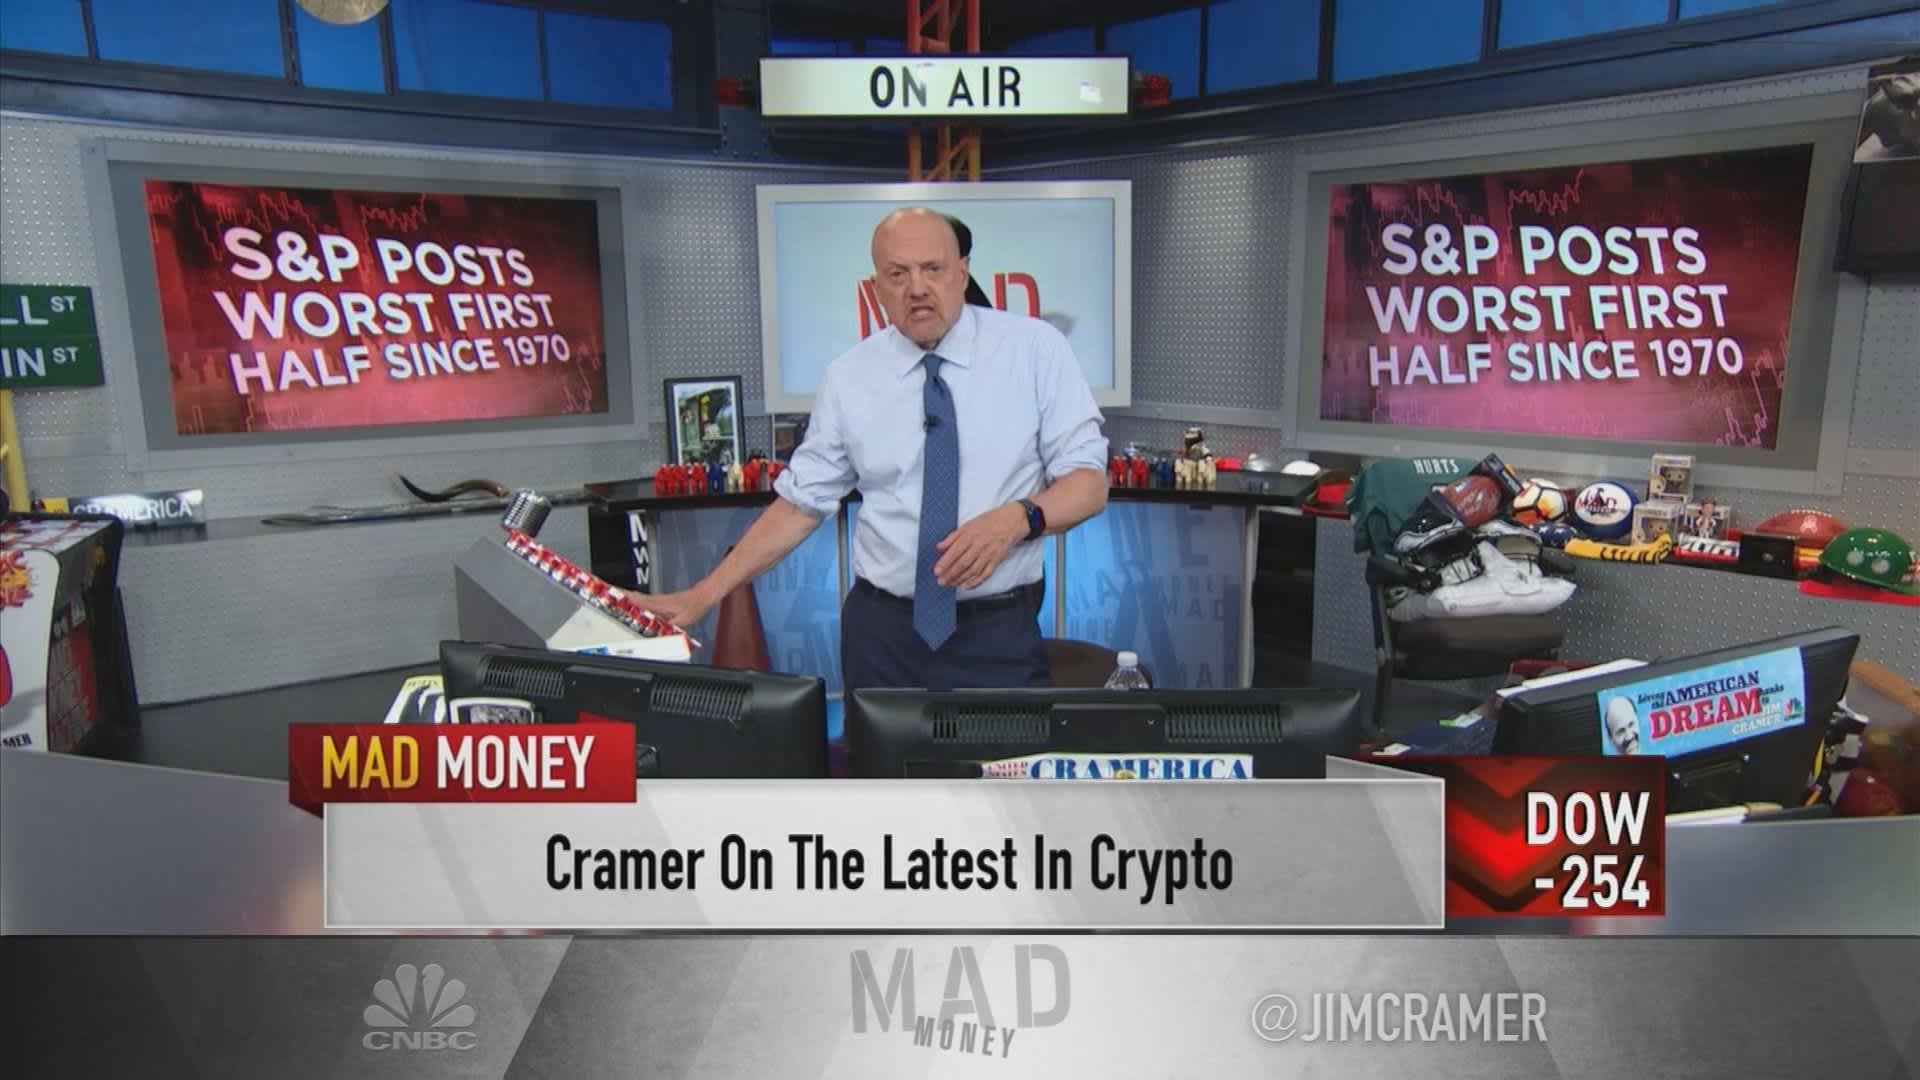 The crypto collapse shows the Fed's job is 'almost complete' against inflation, Jim Cramer says